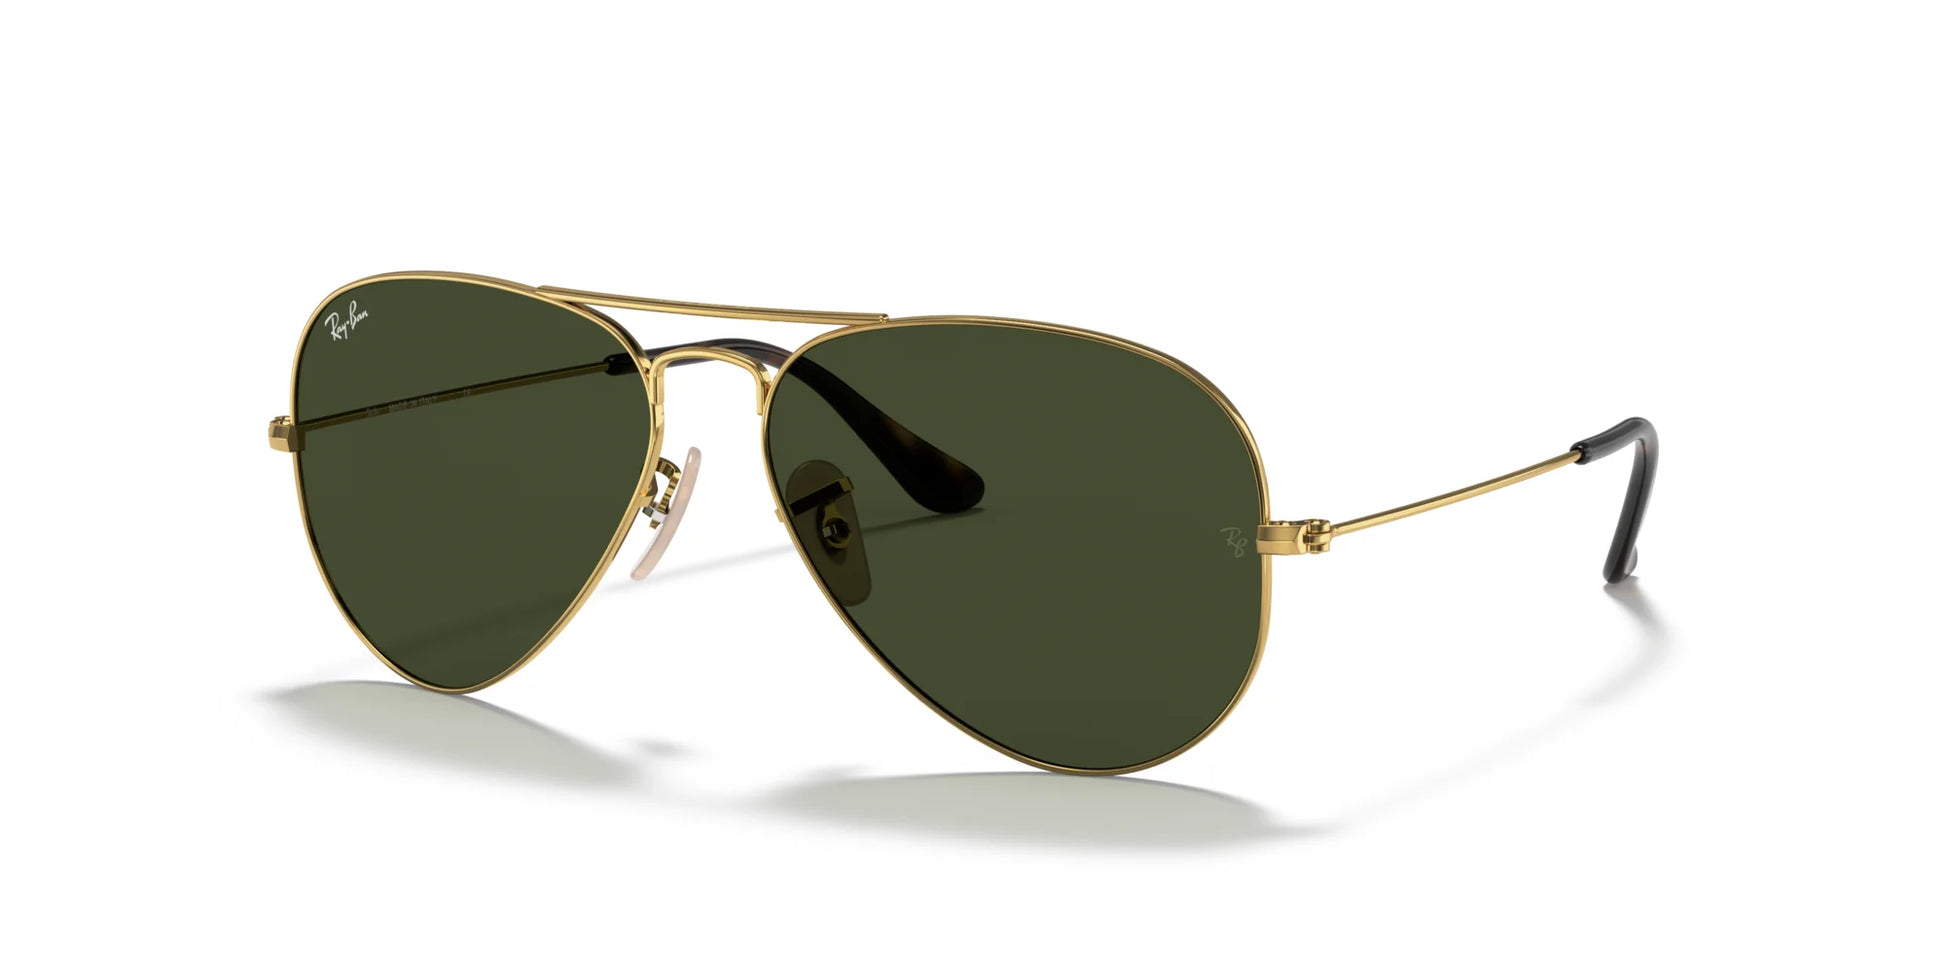 Ray-Ban AVIATOR LARGE METAL RB3025 Sunglasses | Size 58 Gold / Green